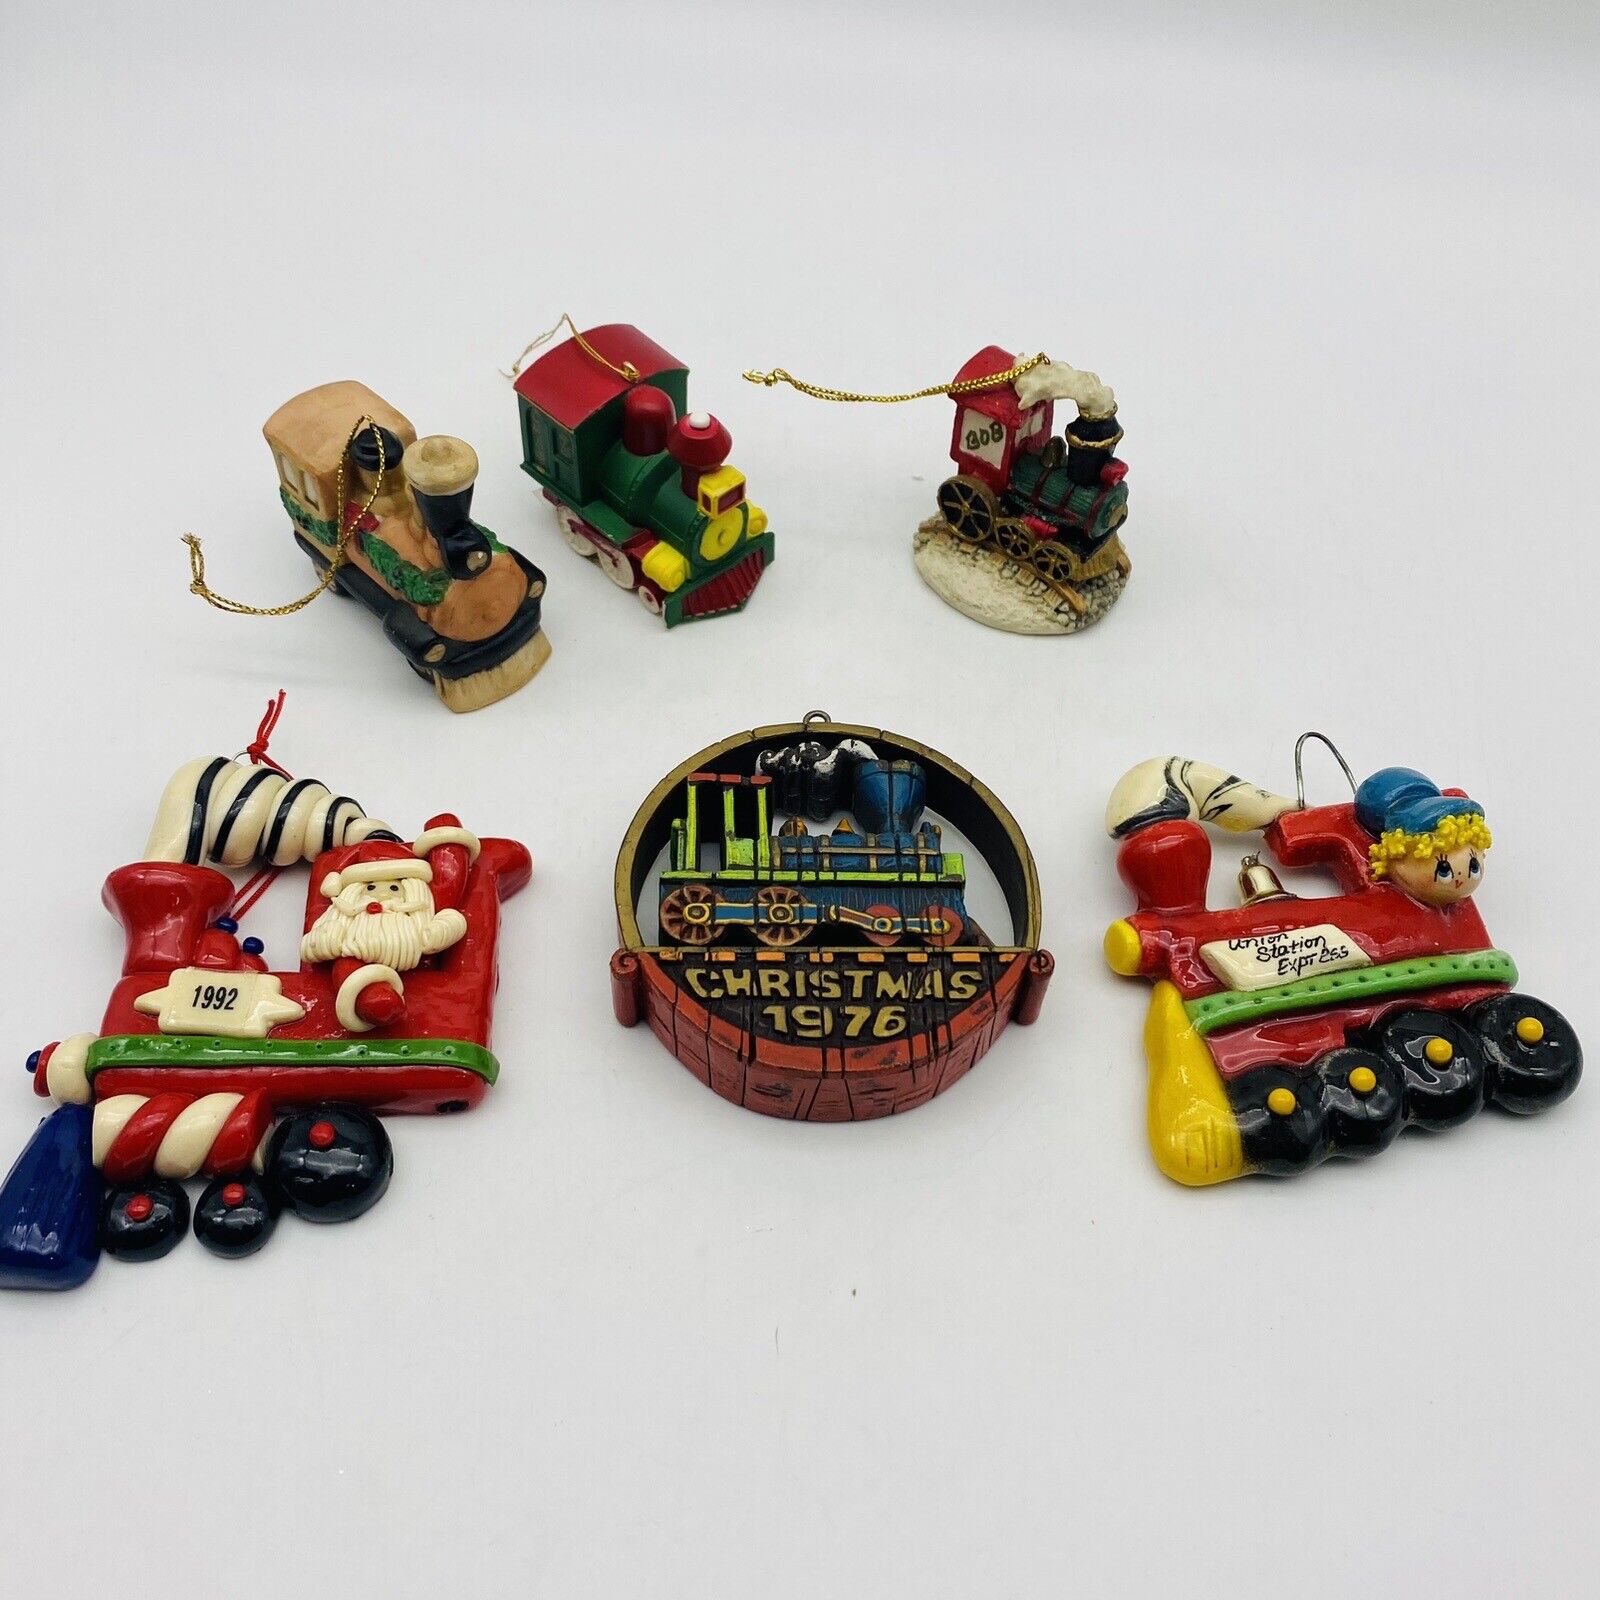 Christmas Train Ornaments Vintage Mixed Lot of 6 Train Themed Ornaments